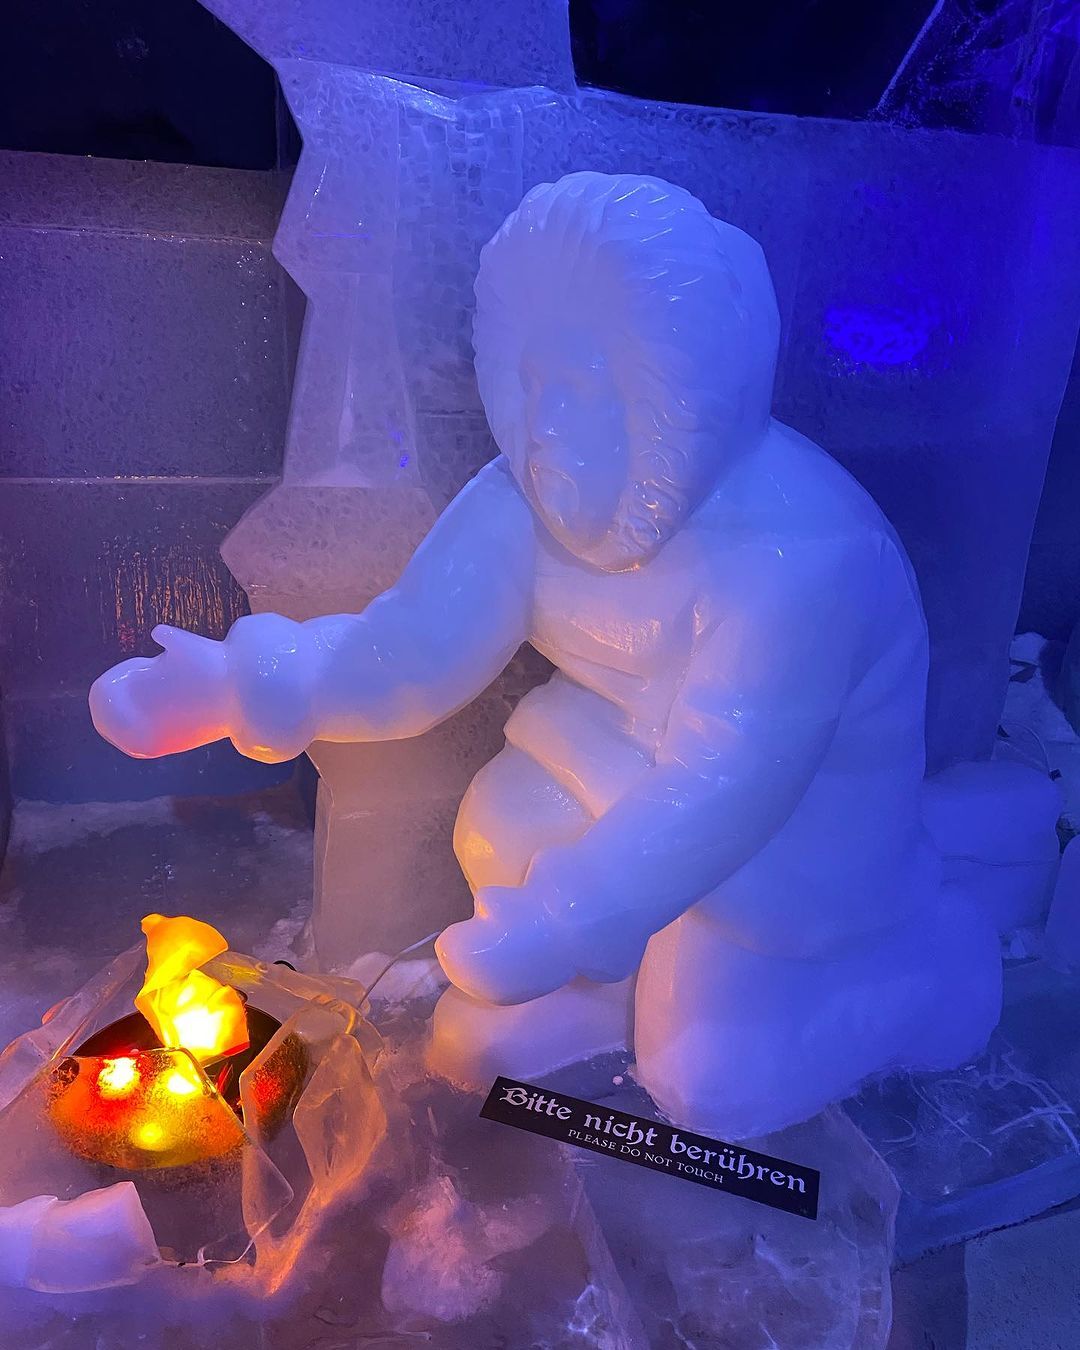 Berlin Ice Bar ….. it was sooo cold In there.  Nice white chocokk lol ate vodka tho too keep me warm I’m the end. The bar man was some craic too. 

#berlinicebar #frozen #drinkies #recommended